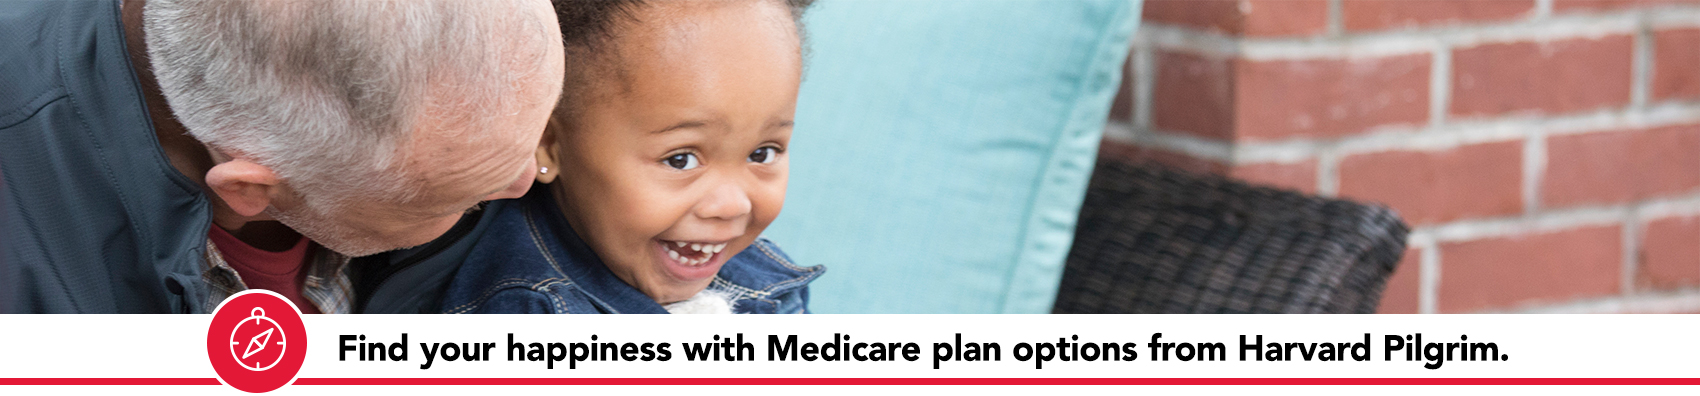 Find your happiness with Medicare plan options from Harvard Pilgrim